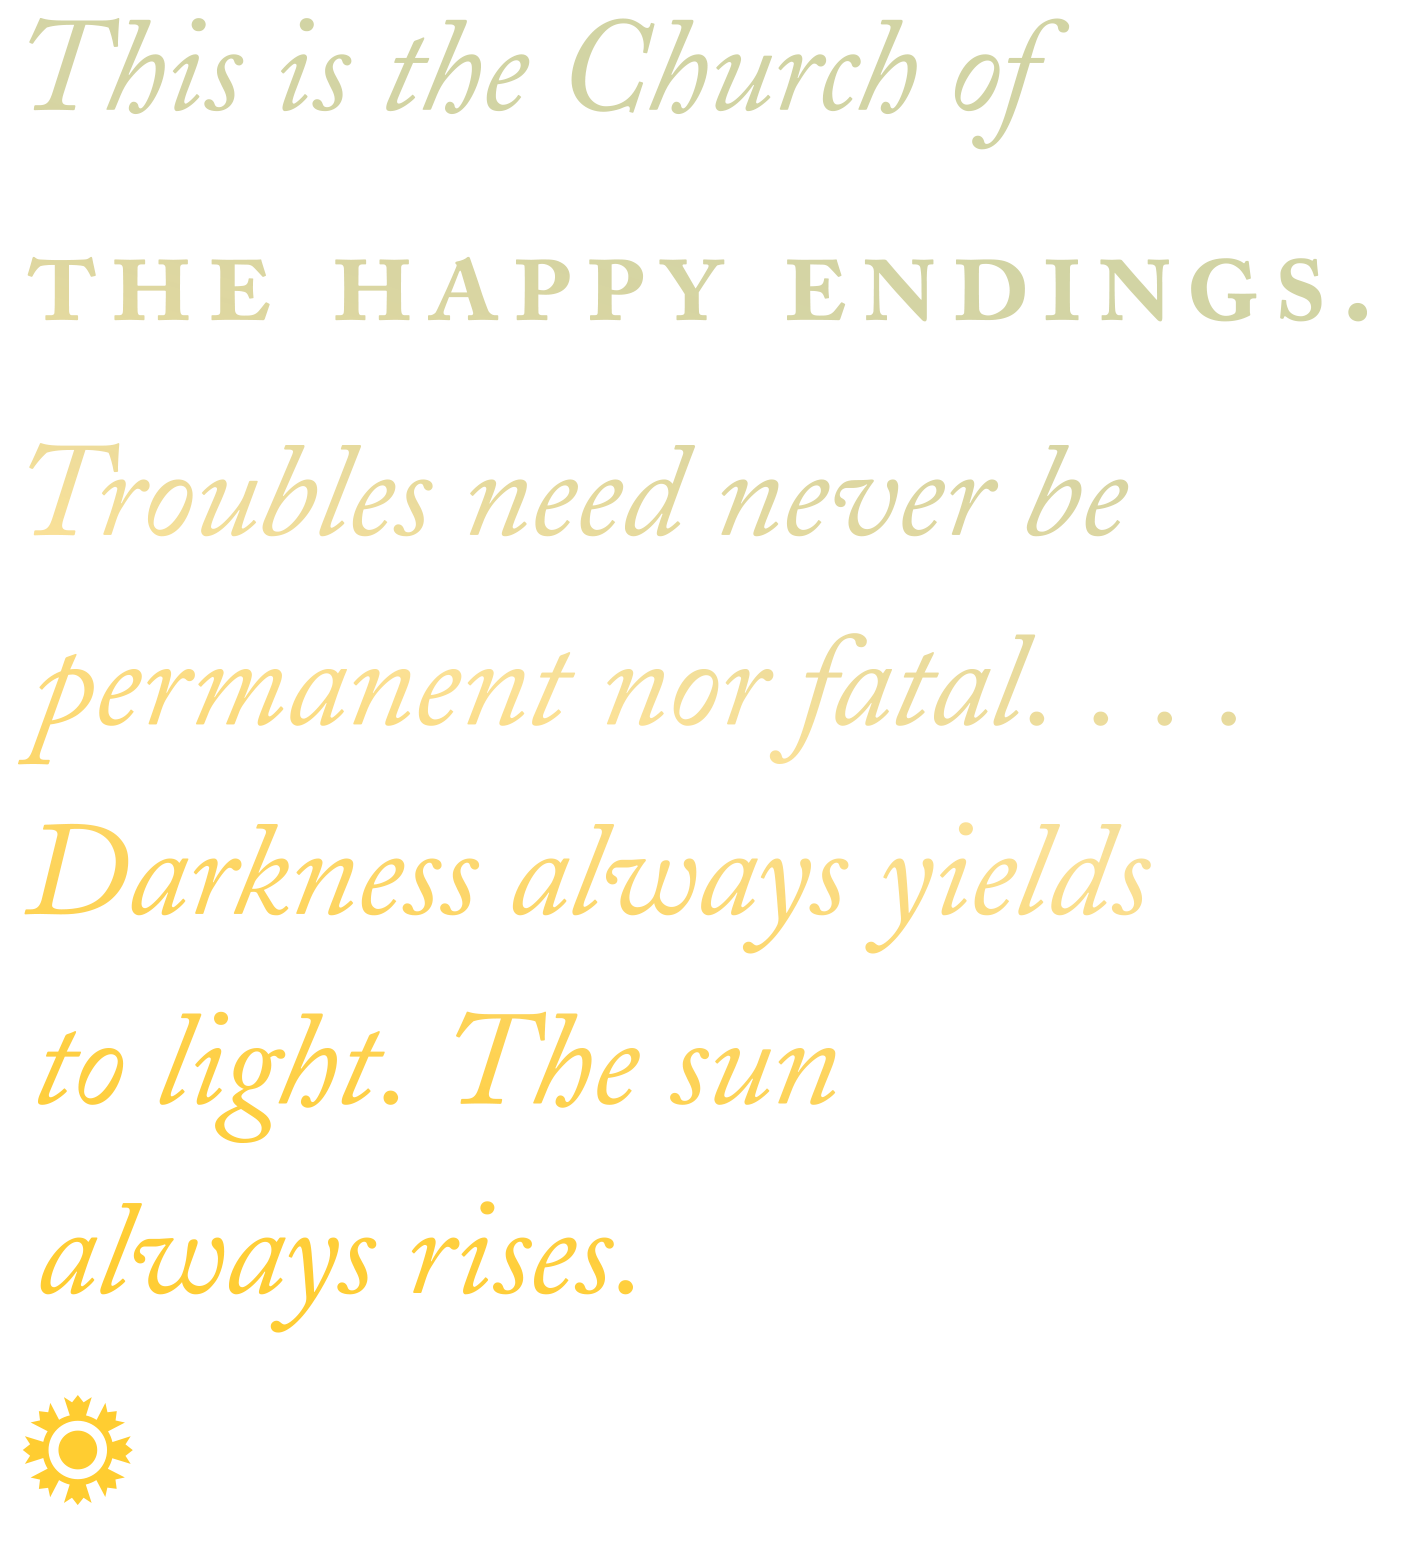 Pull quote that reads: "This is the Church of the happy endings. Troubles need never be permanent nor fatal. . . . Darkness always yields to light. The sun always rises."